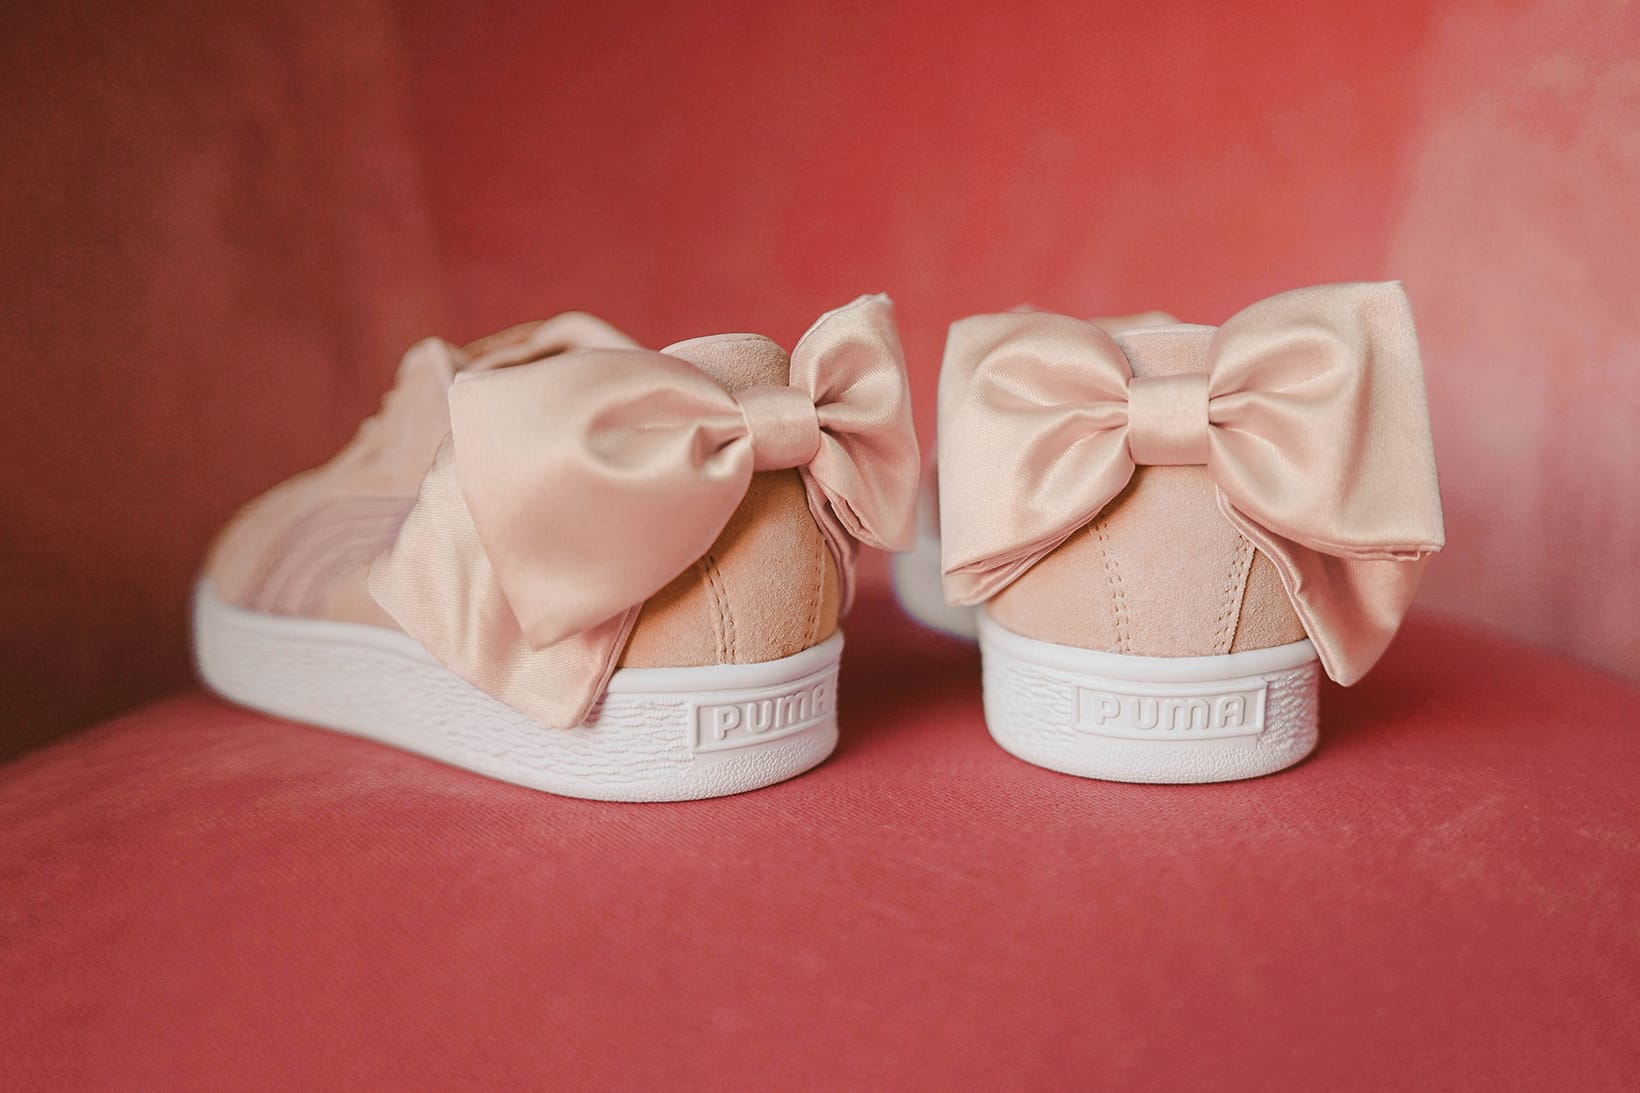 puma pink sneakers with bow